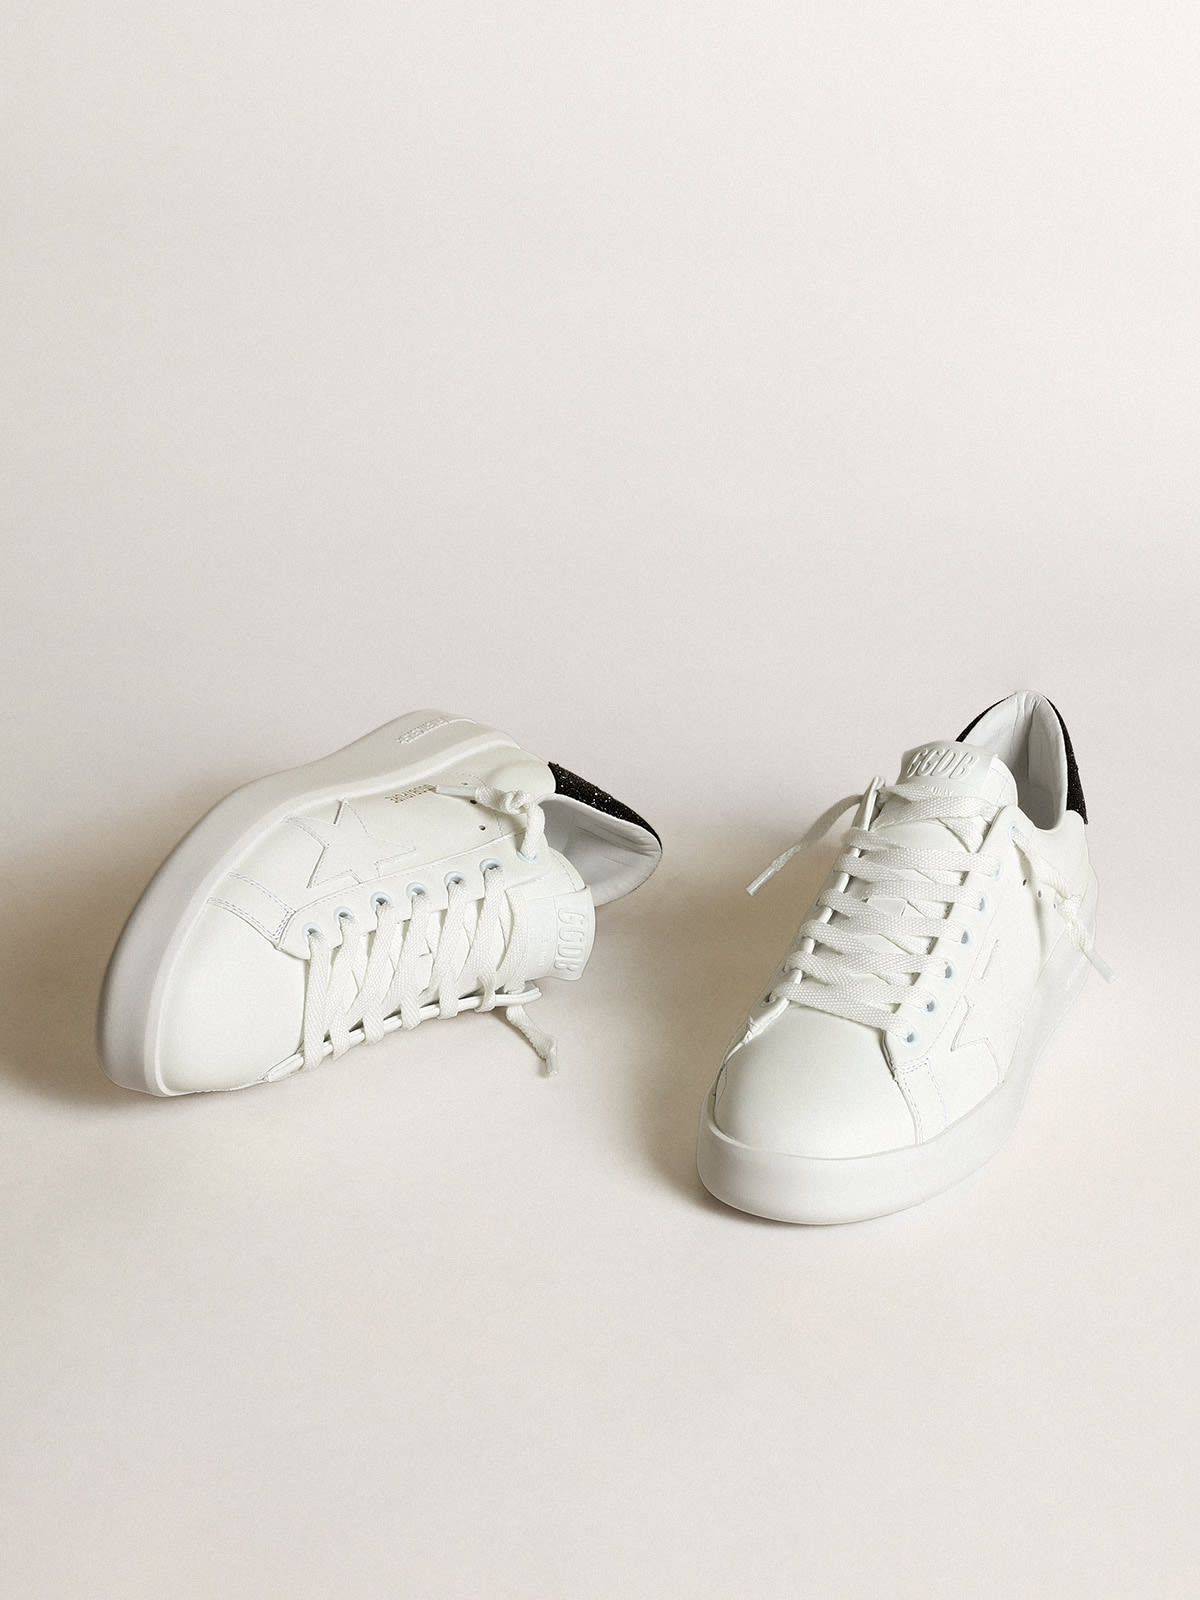 Golden Goose - Purestar sneakers in white leather with tone-on-tone star and heel tab in black Swarovski crystals in 